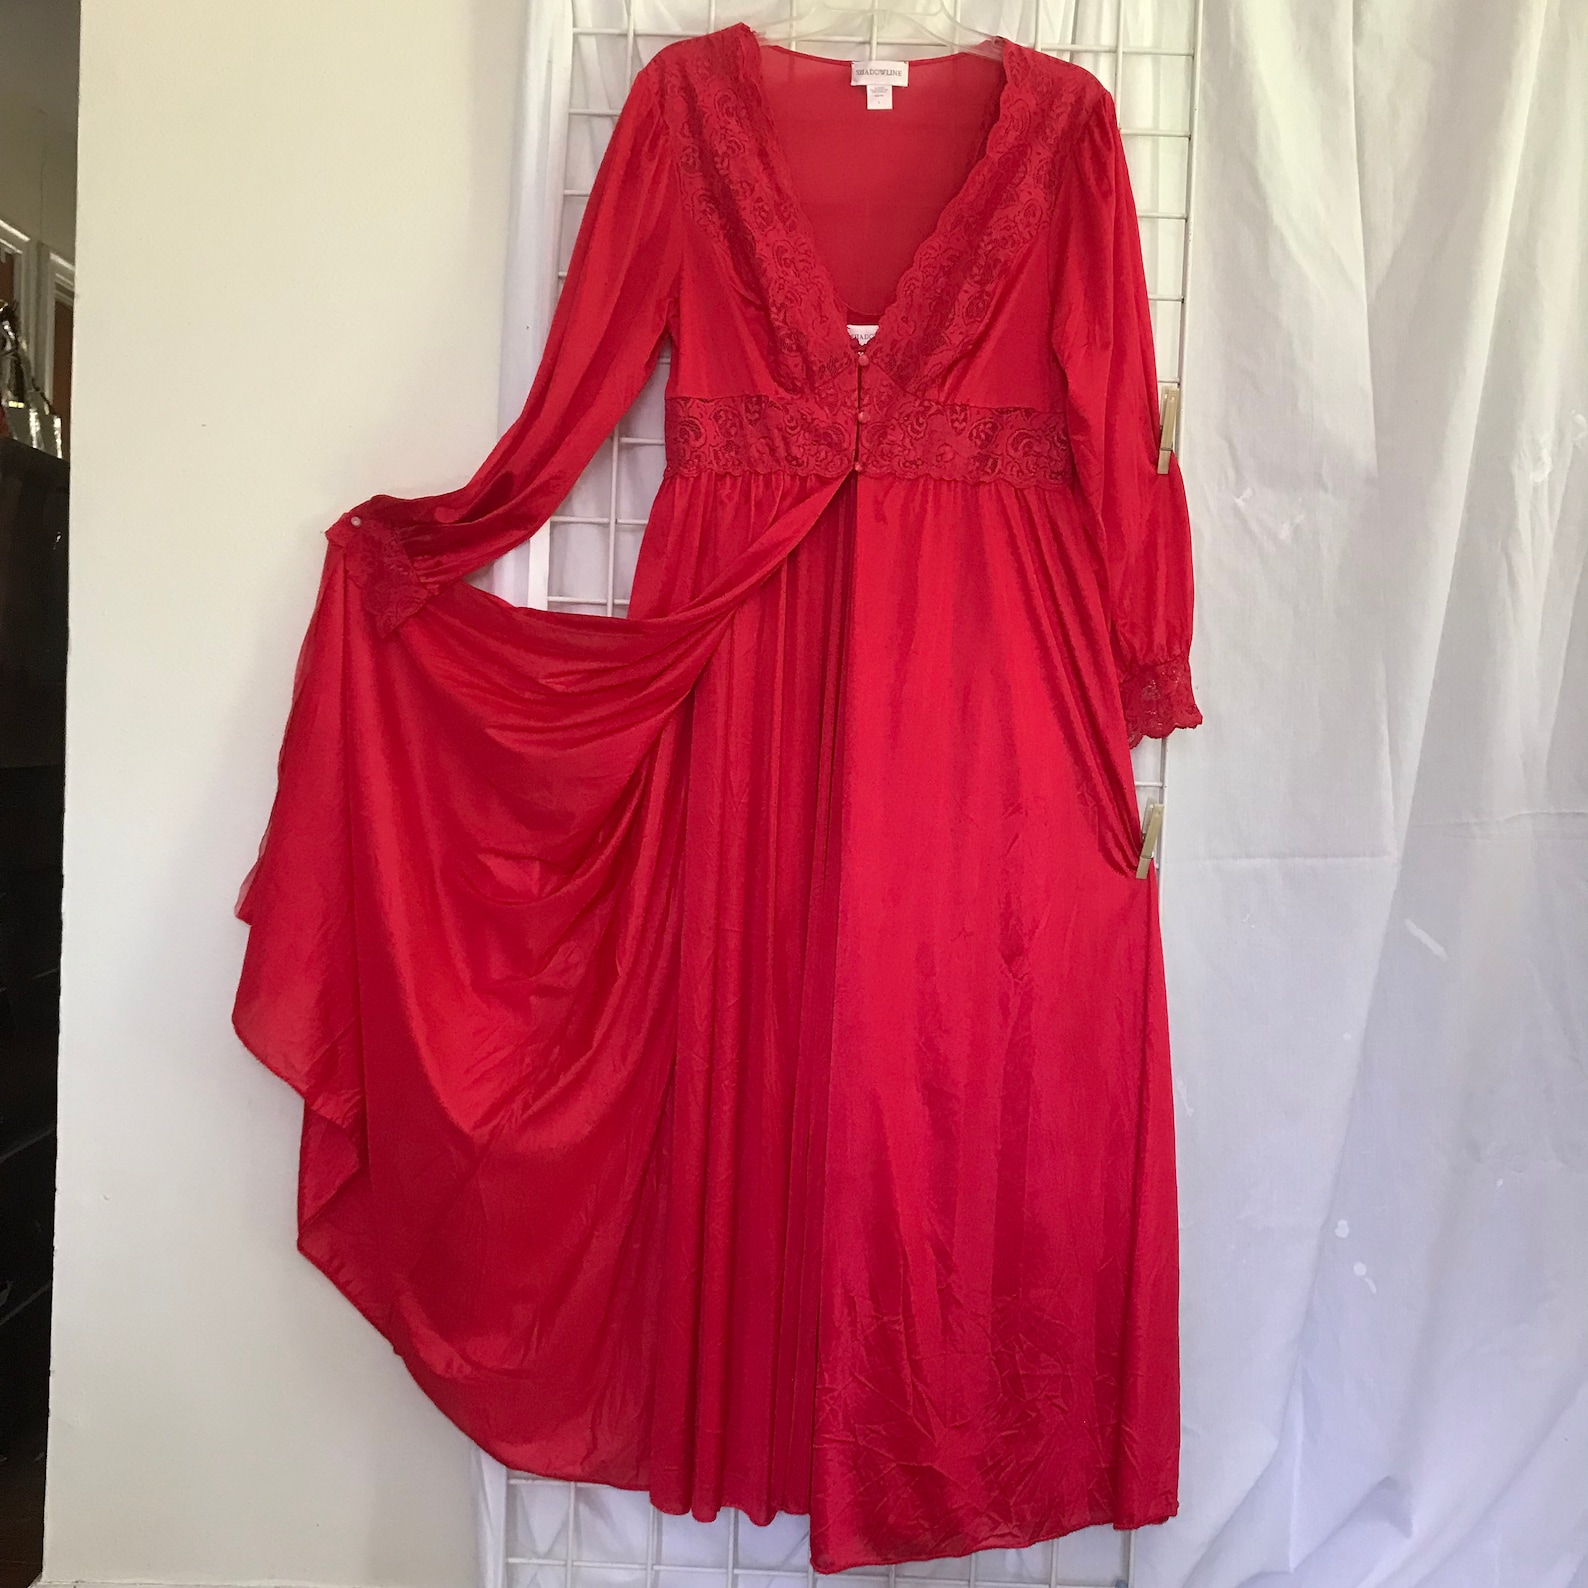 Vintage Red Lace Peignoir Shadowline Nightgown Robe Set - Etsy